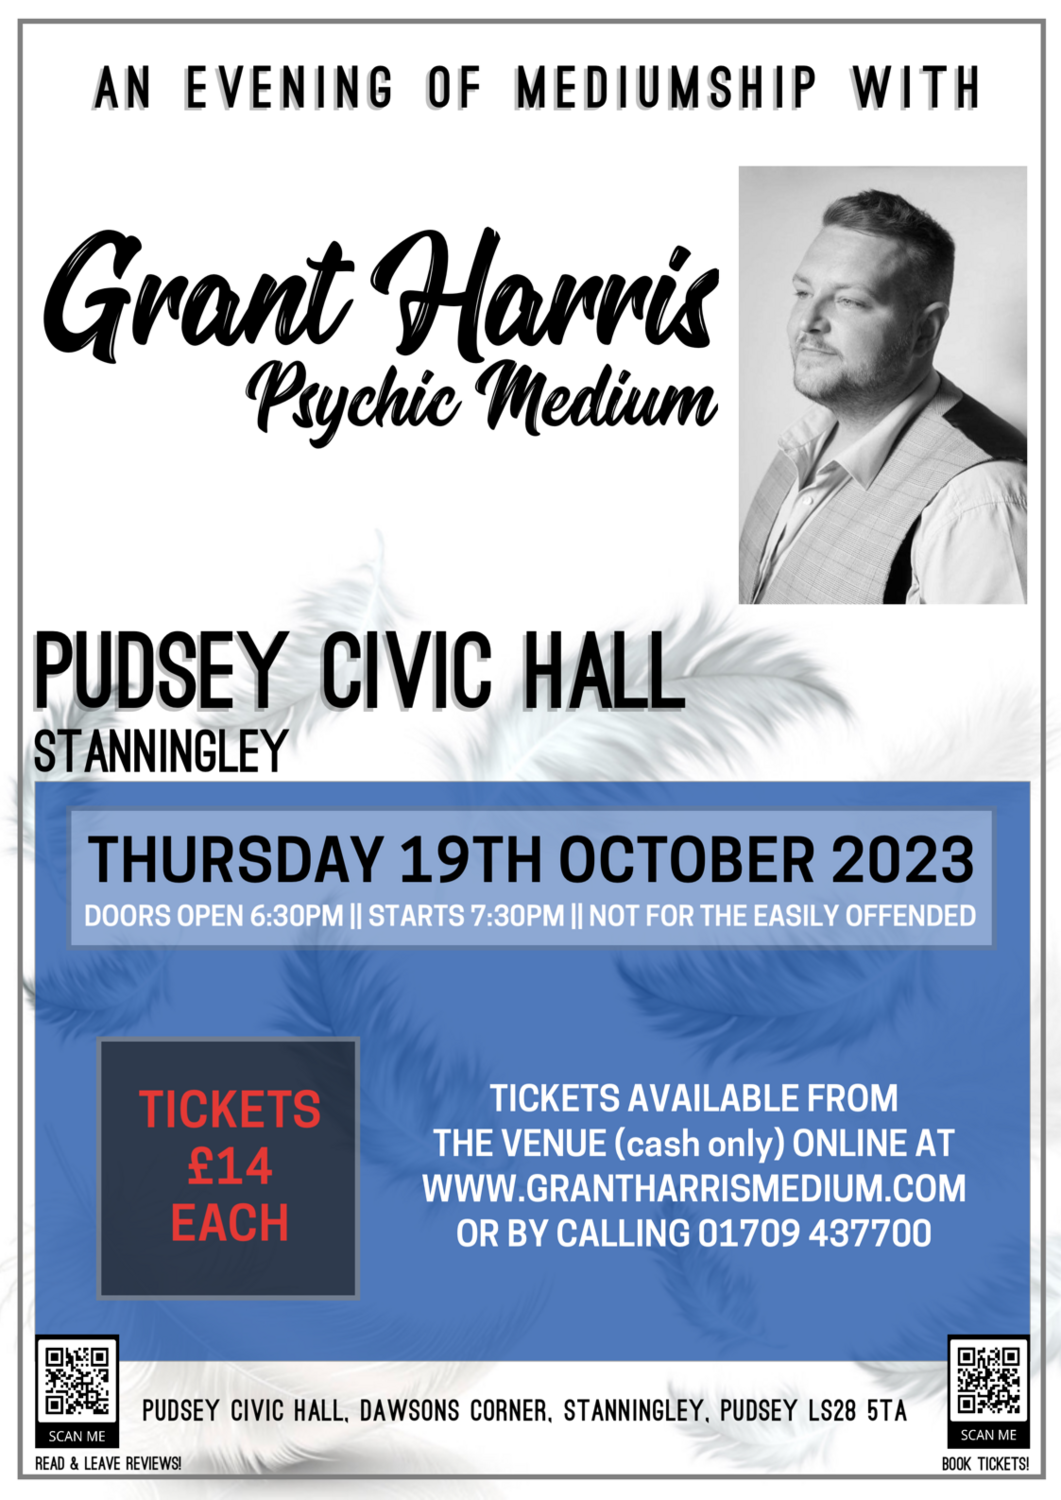 Pudsey Civic Hall, Pudsey, Leeds, Thursday 19th October 2023